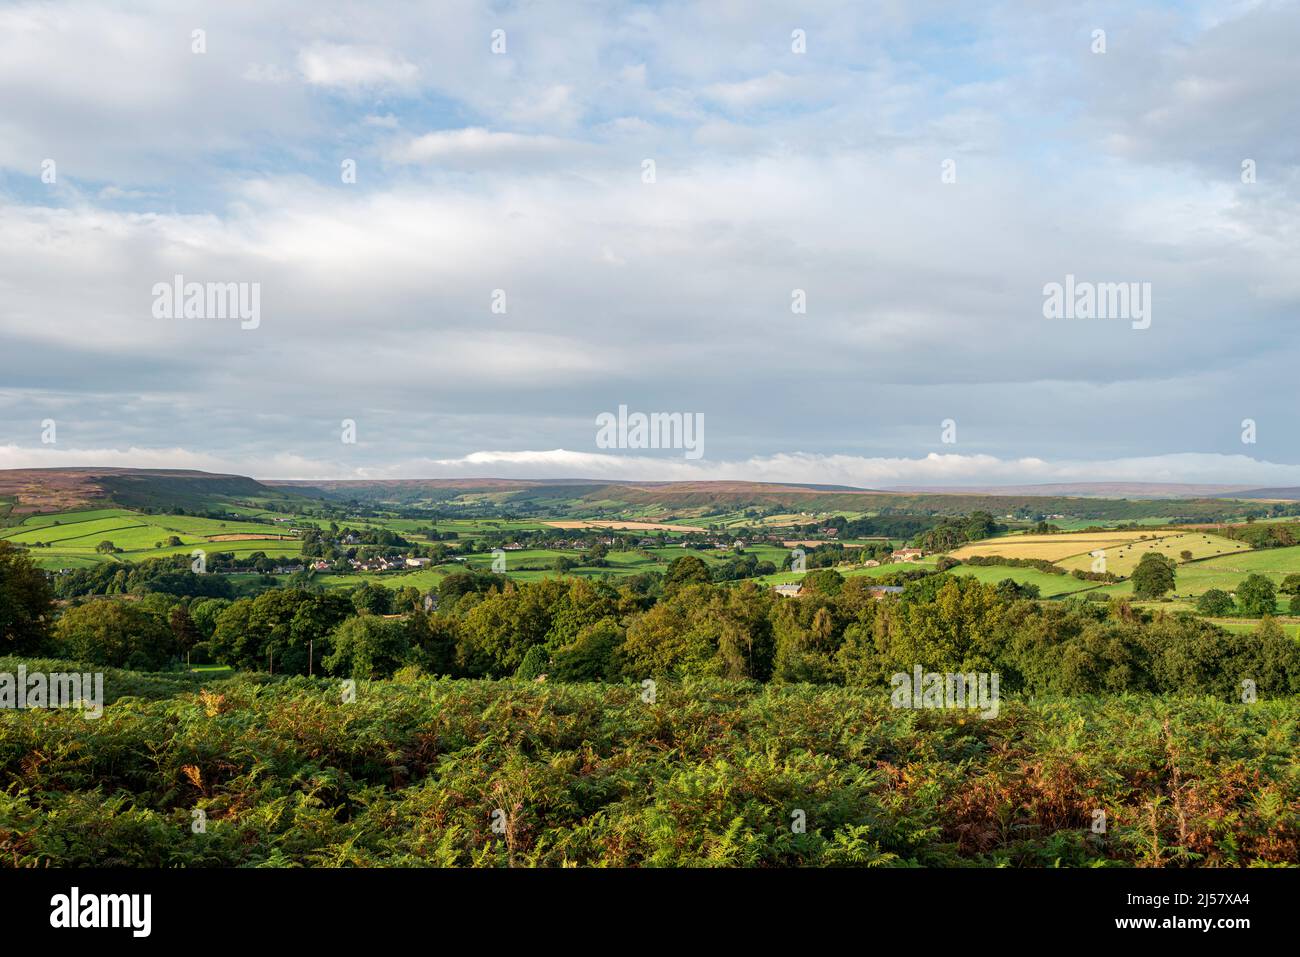 A view looking south from Rosedale Intake towrds Danby and Danby Dale Stock Photo